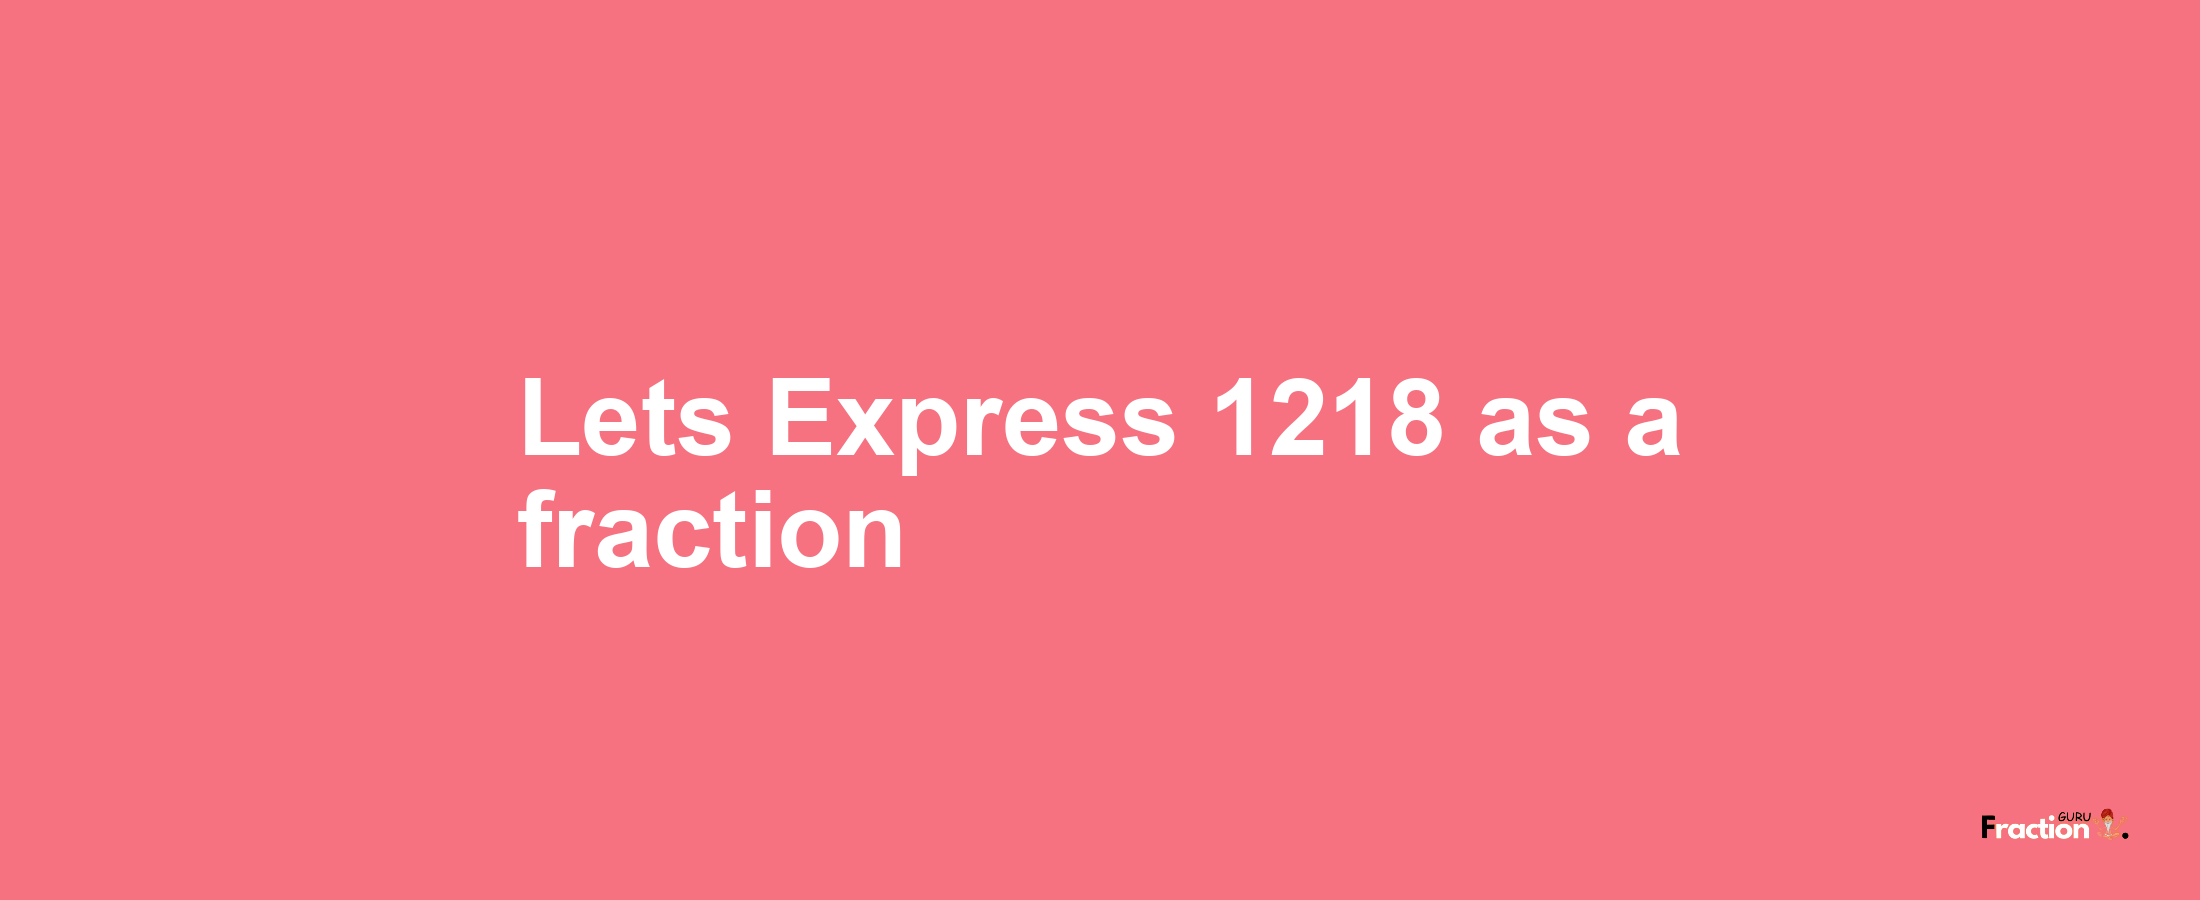 Lets Express 1218 as afraction